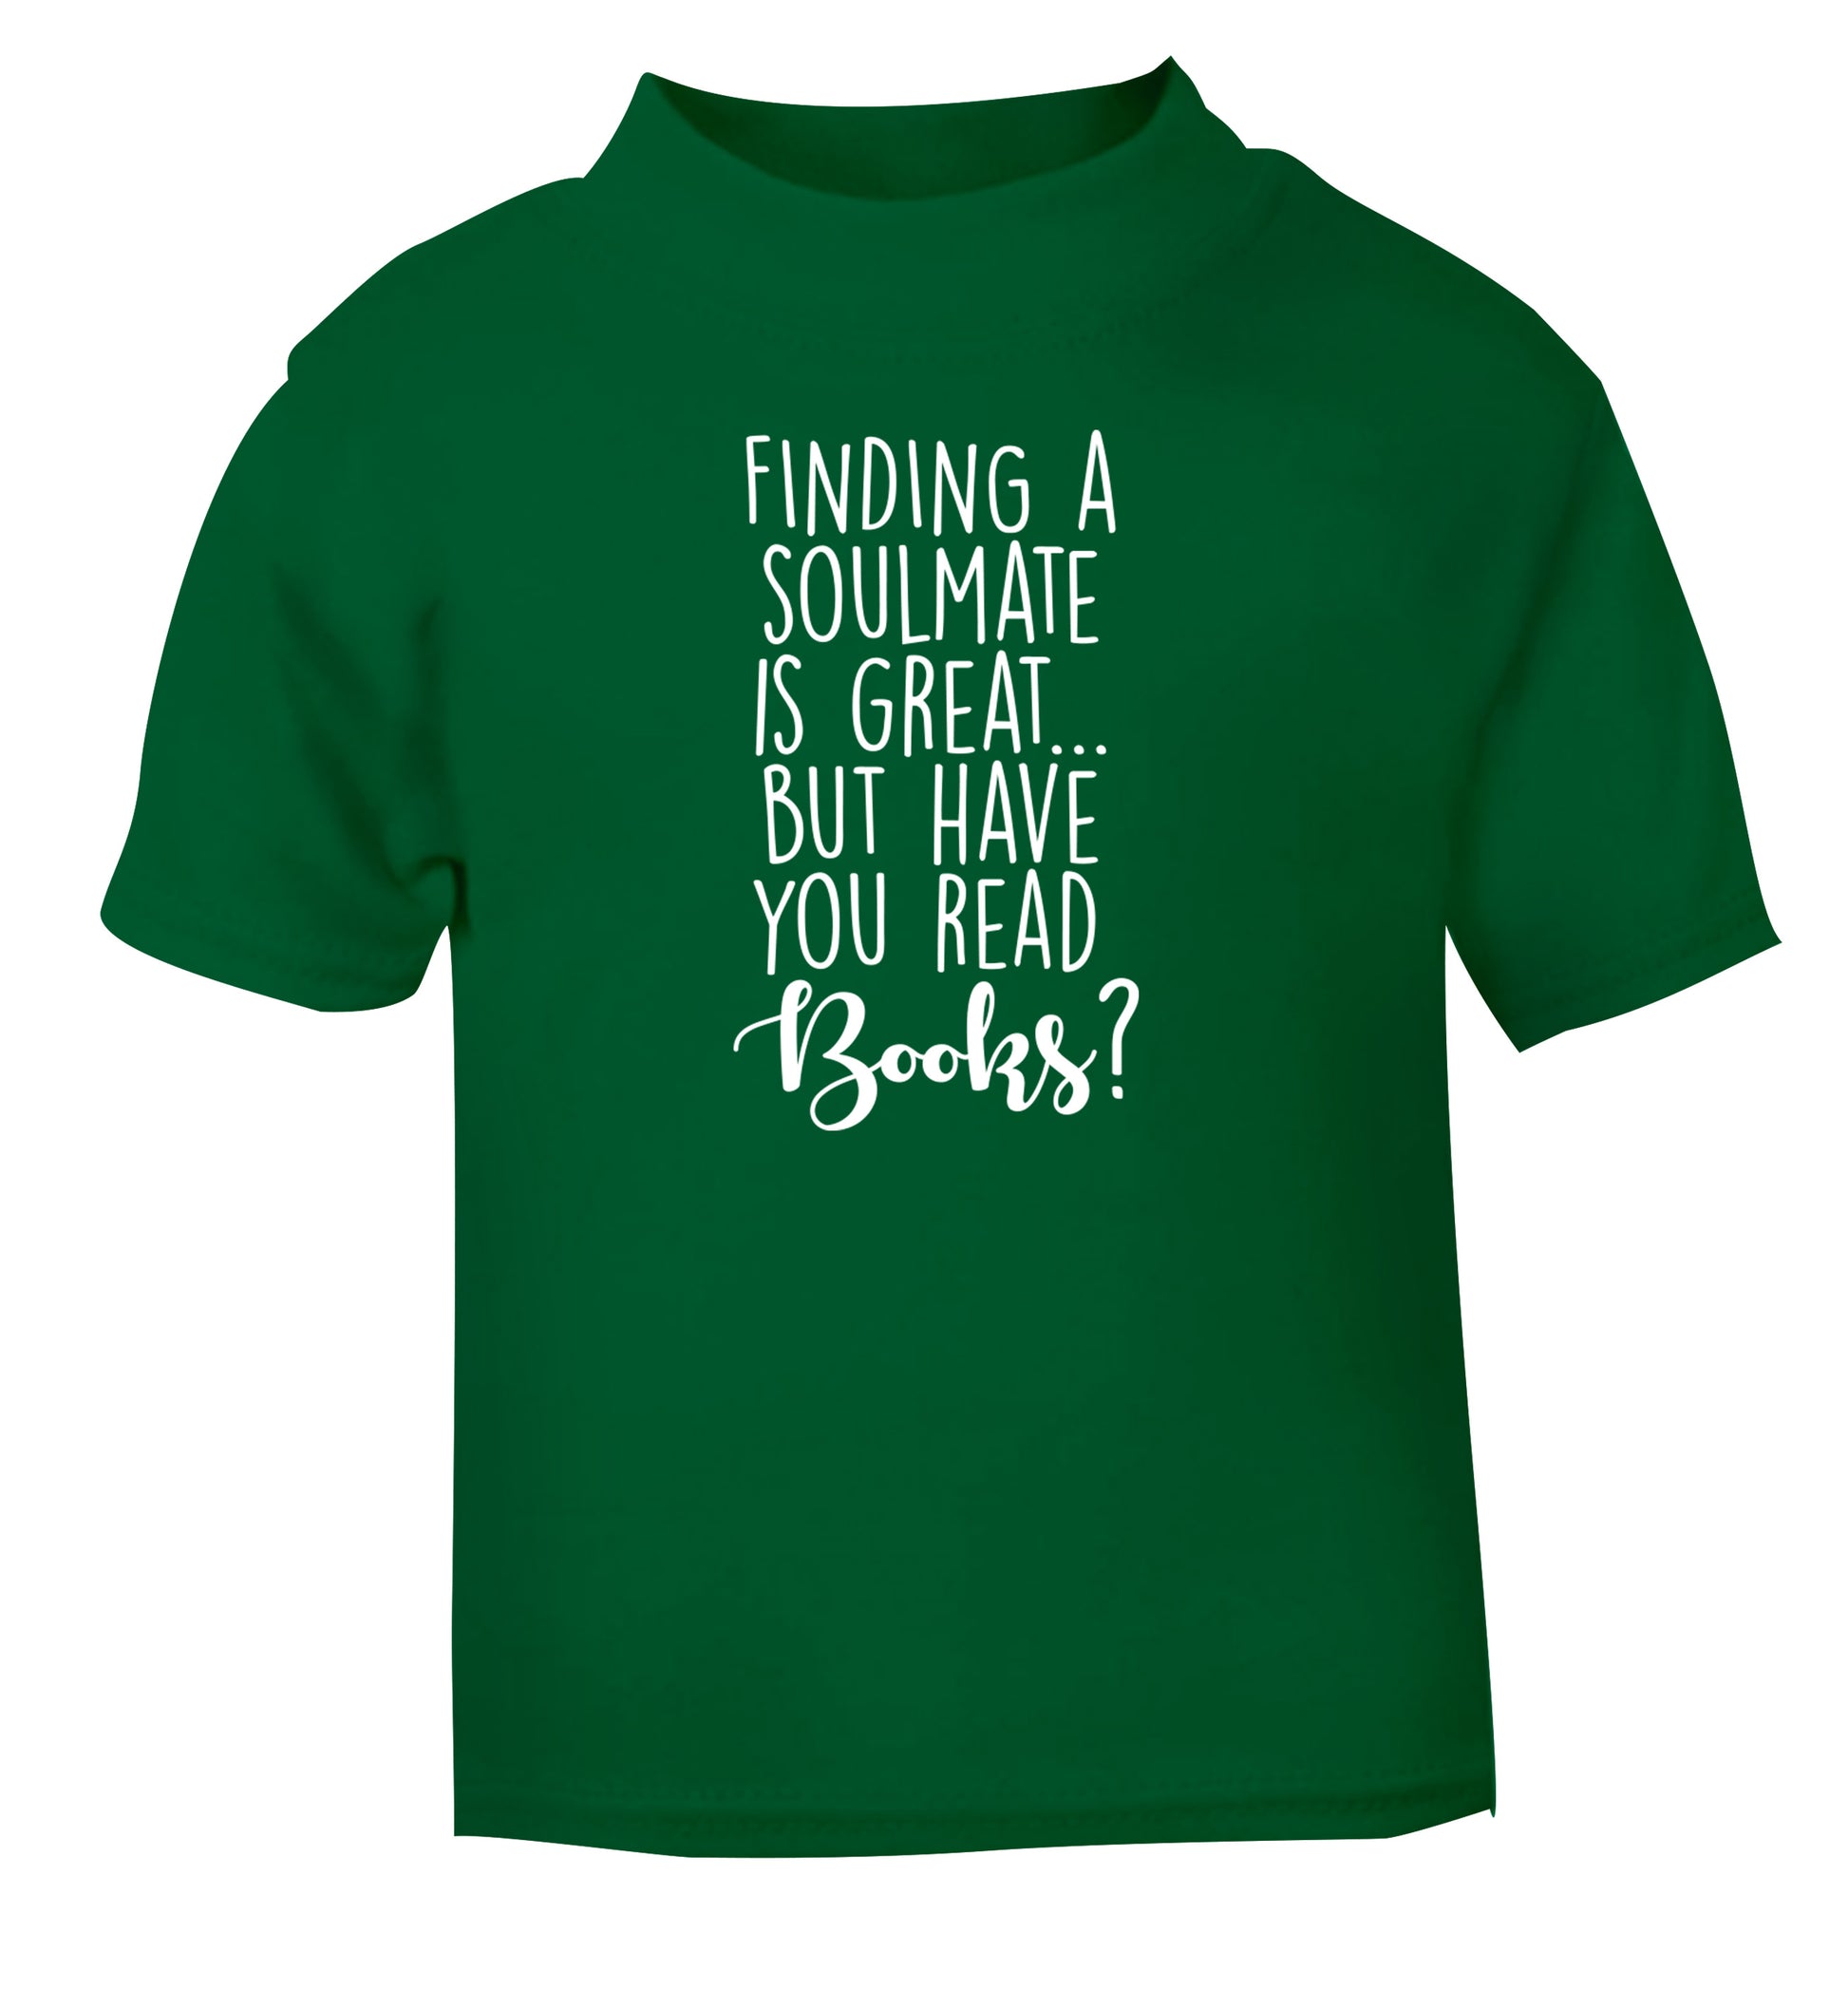 Finding a soulmate is great but have you read books? green Baby Toddler Tshirt 2 Years